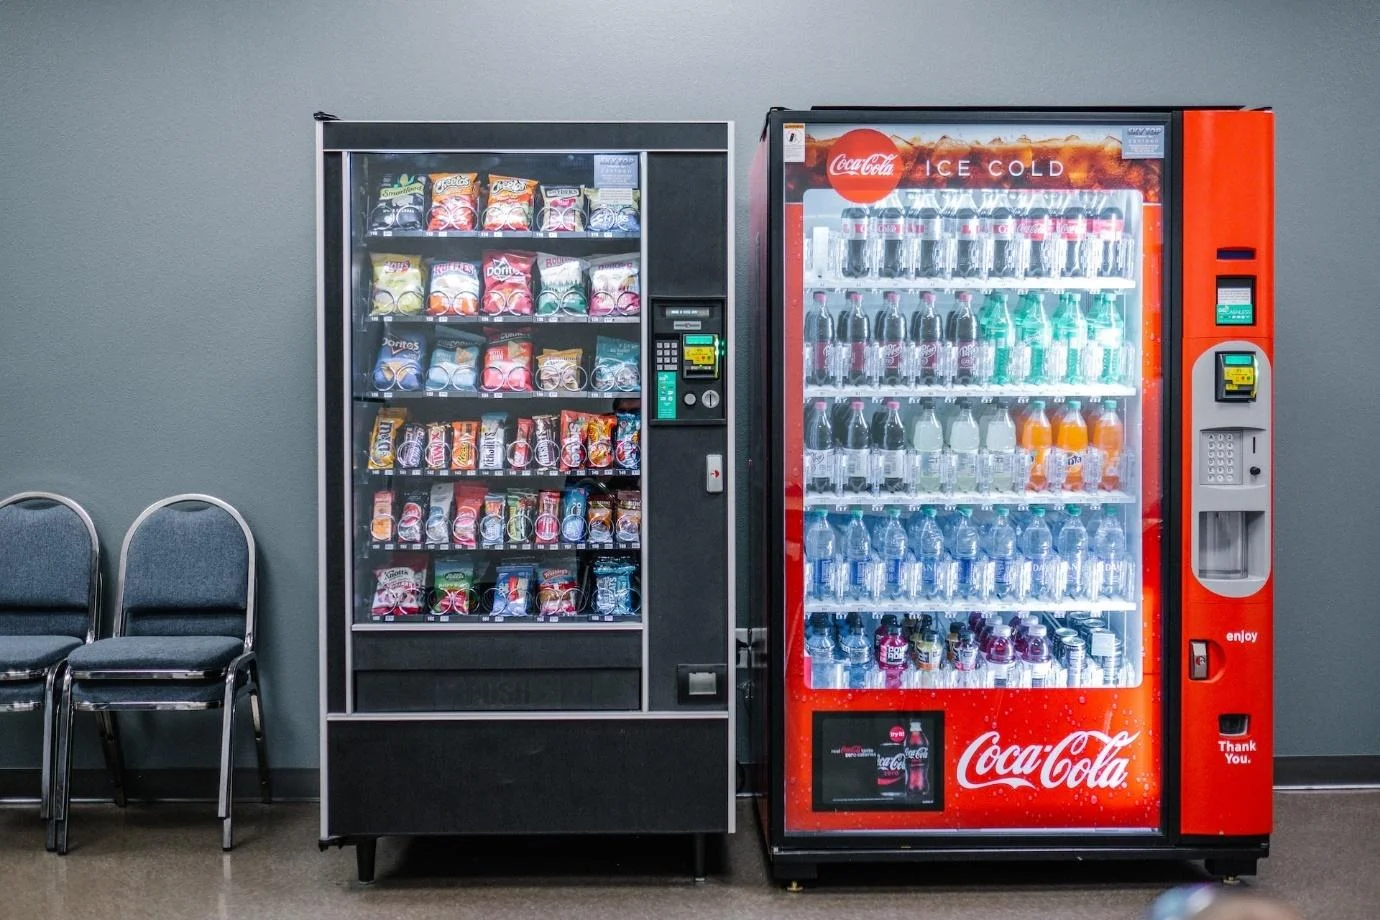 An image of two vending machines for snacks (left) and beverages (right)